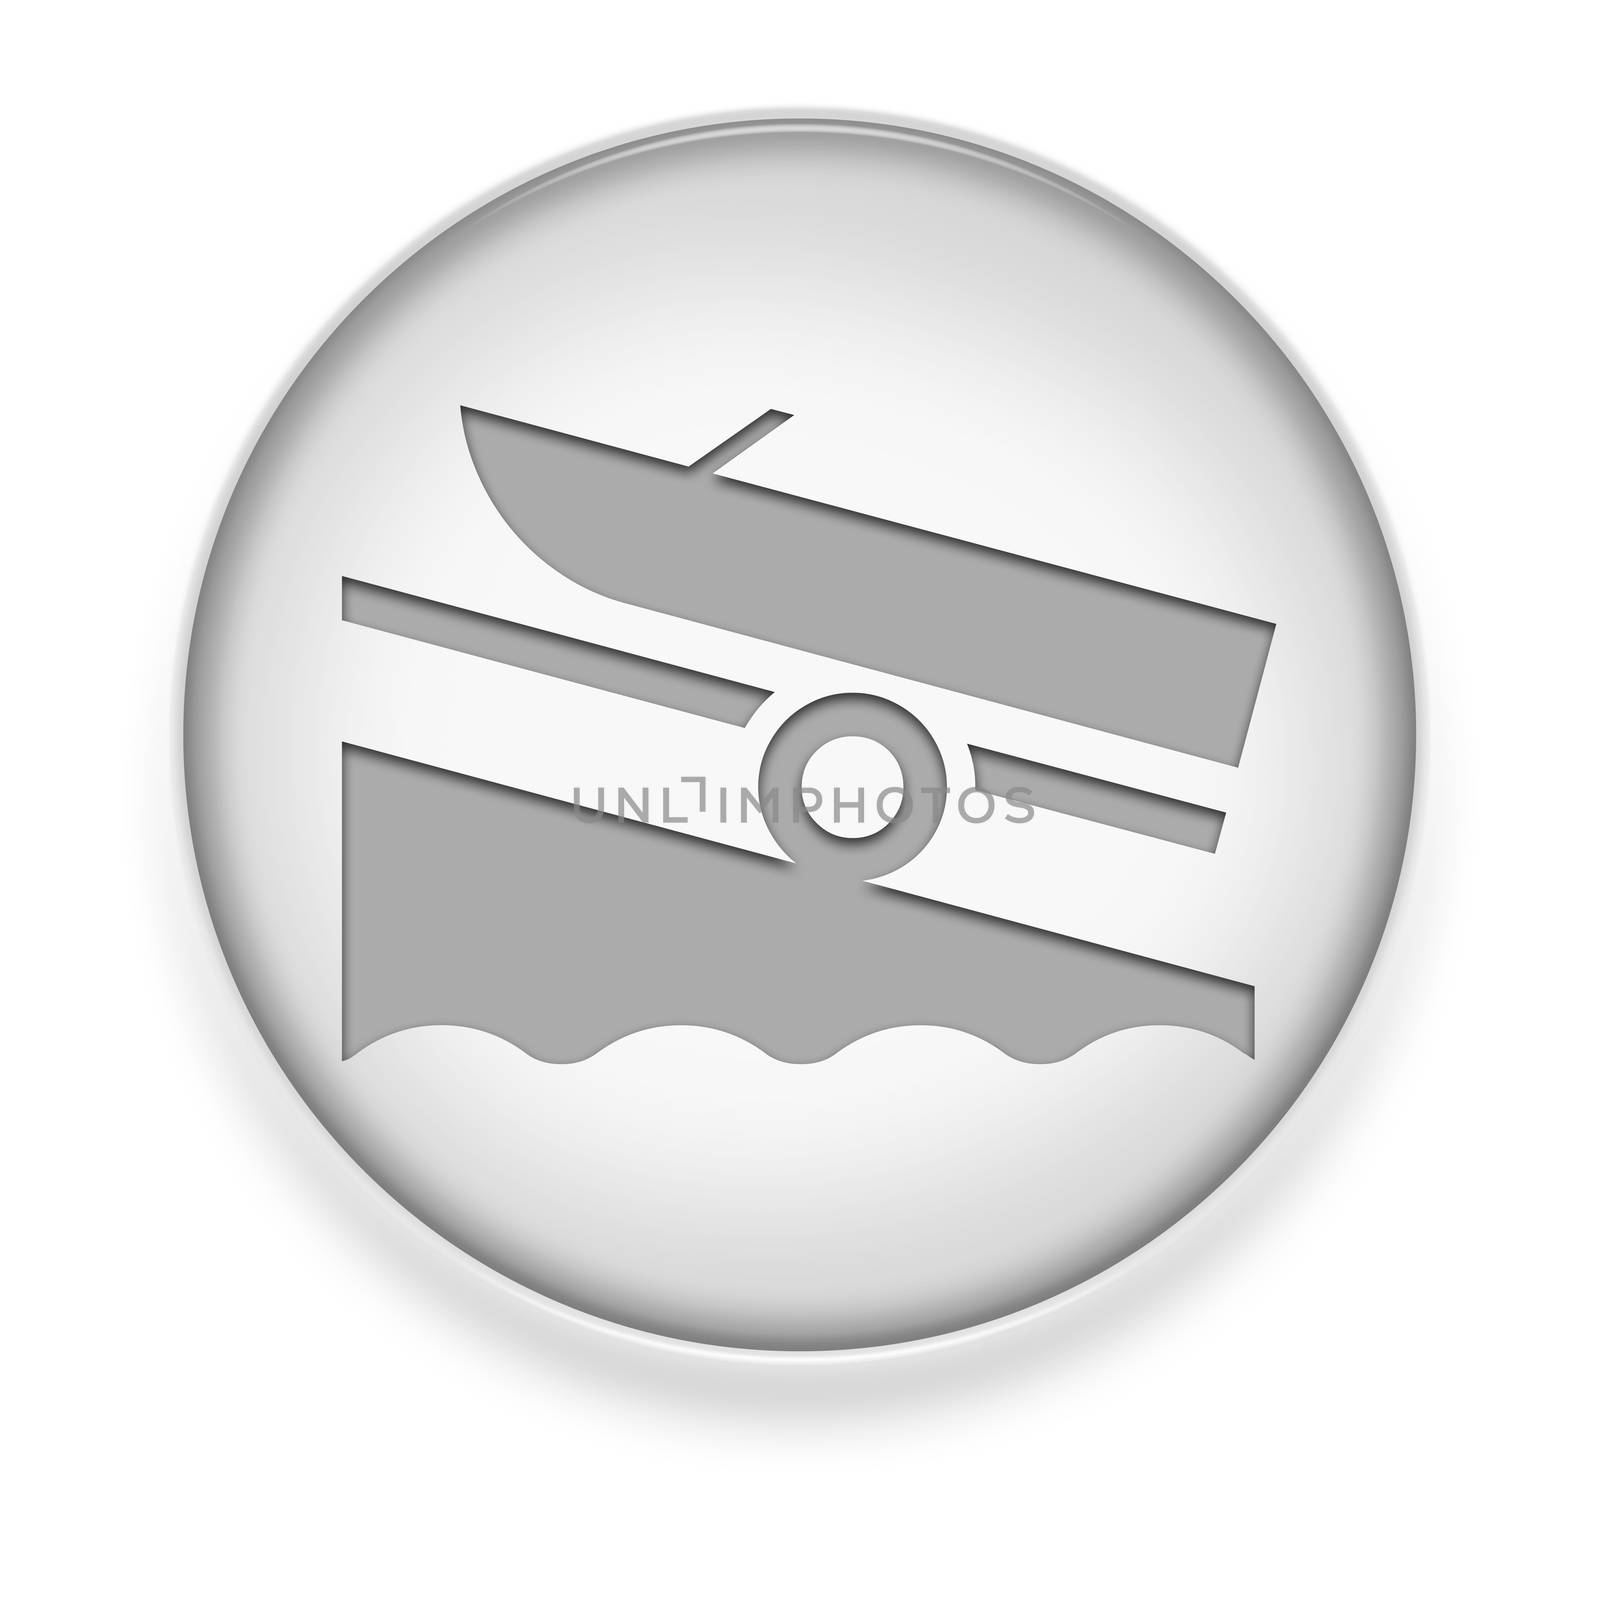 Icon, Button, Pictogram Boat Ramp by mindscanner